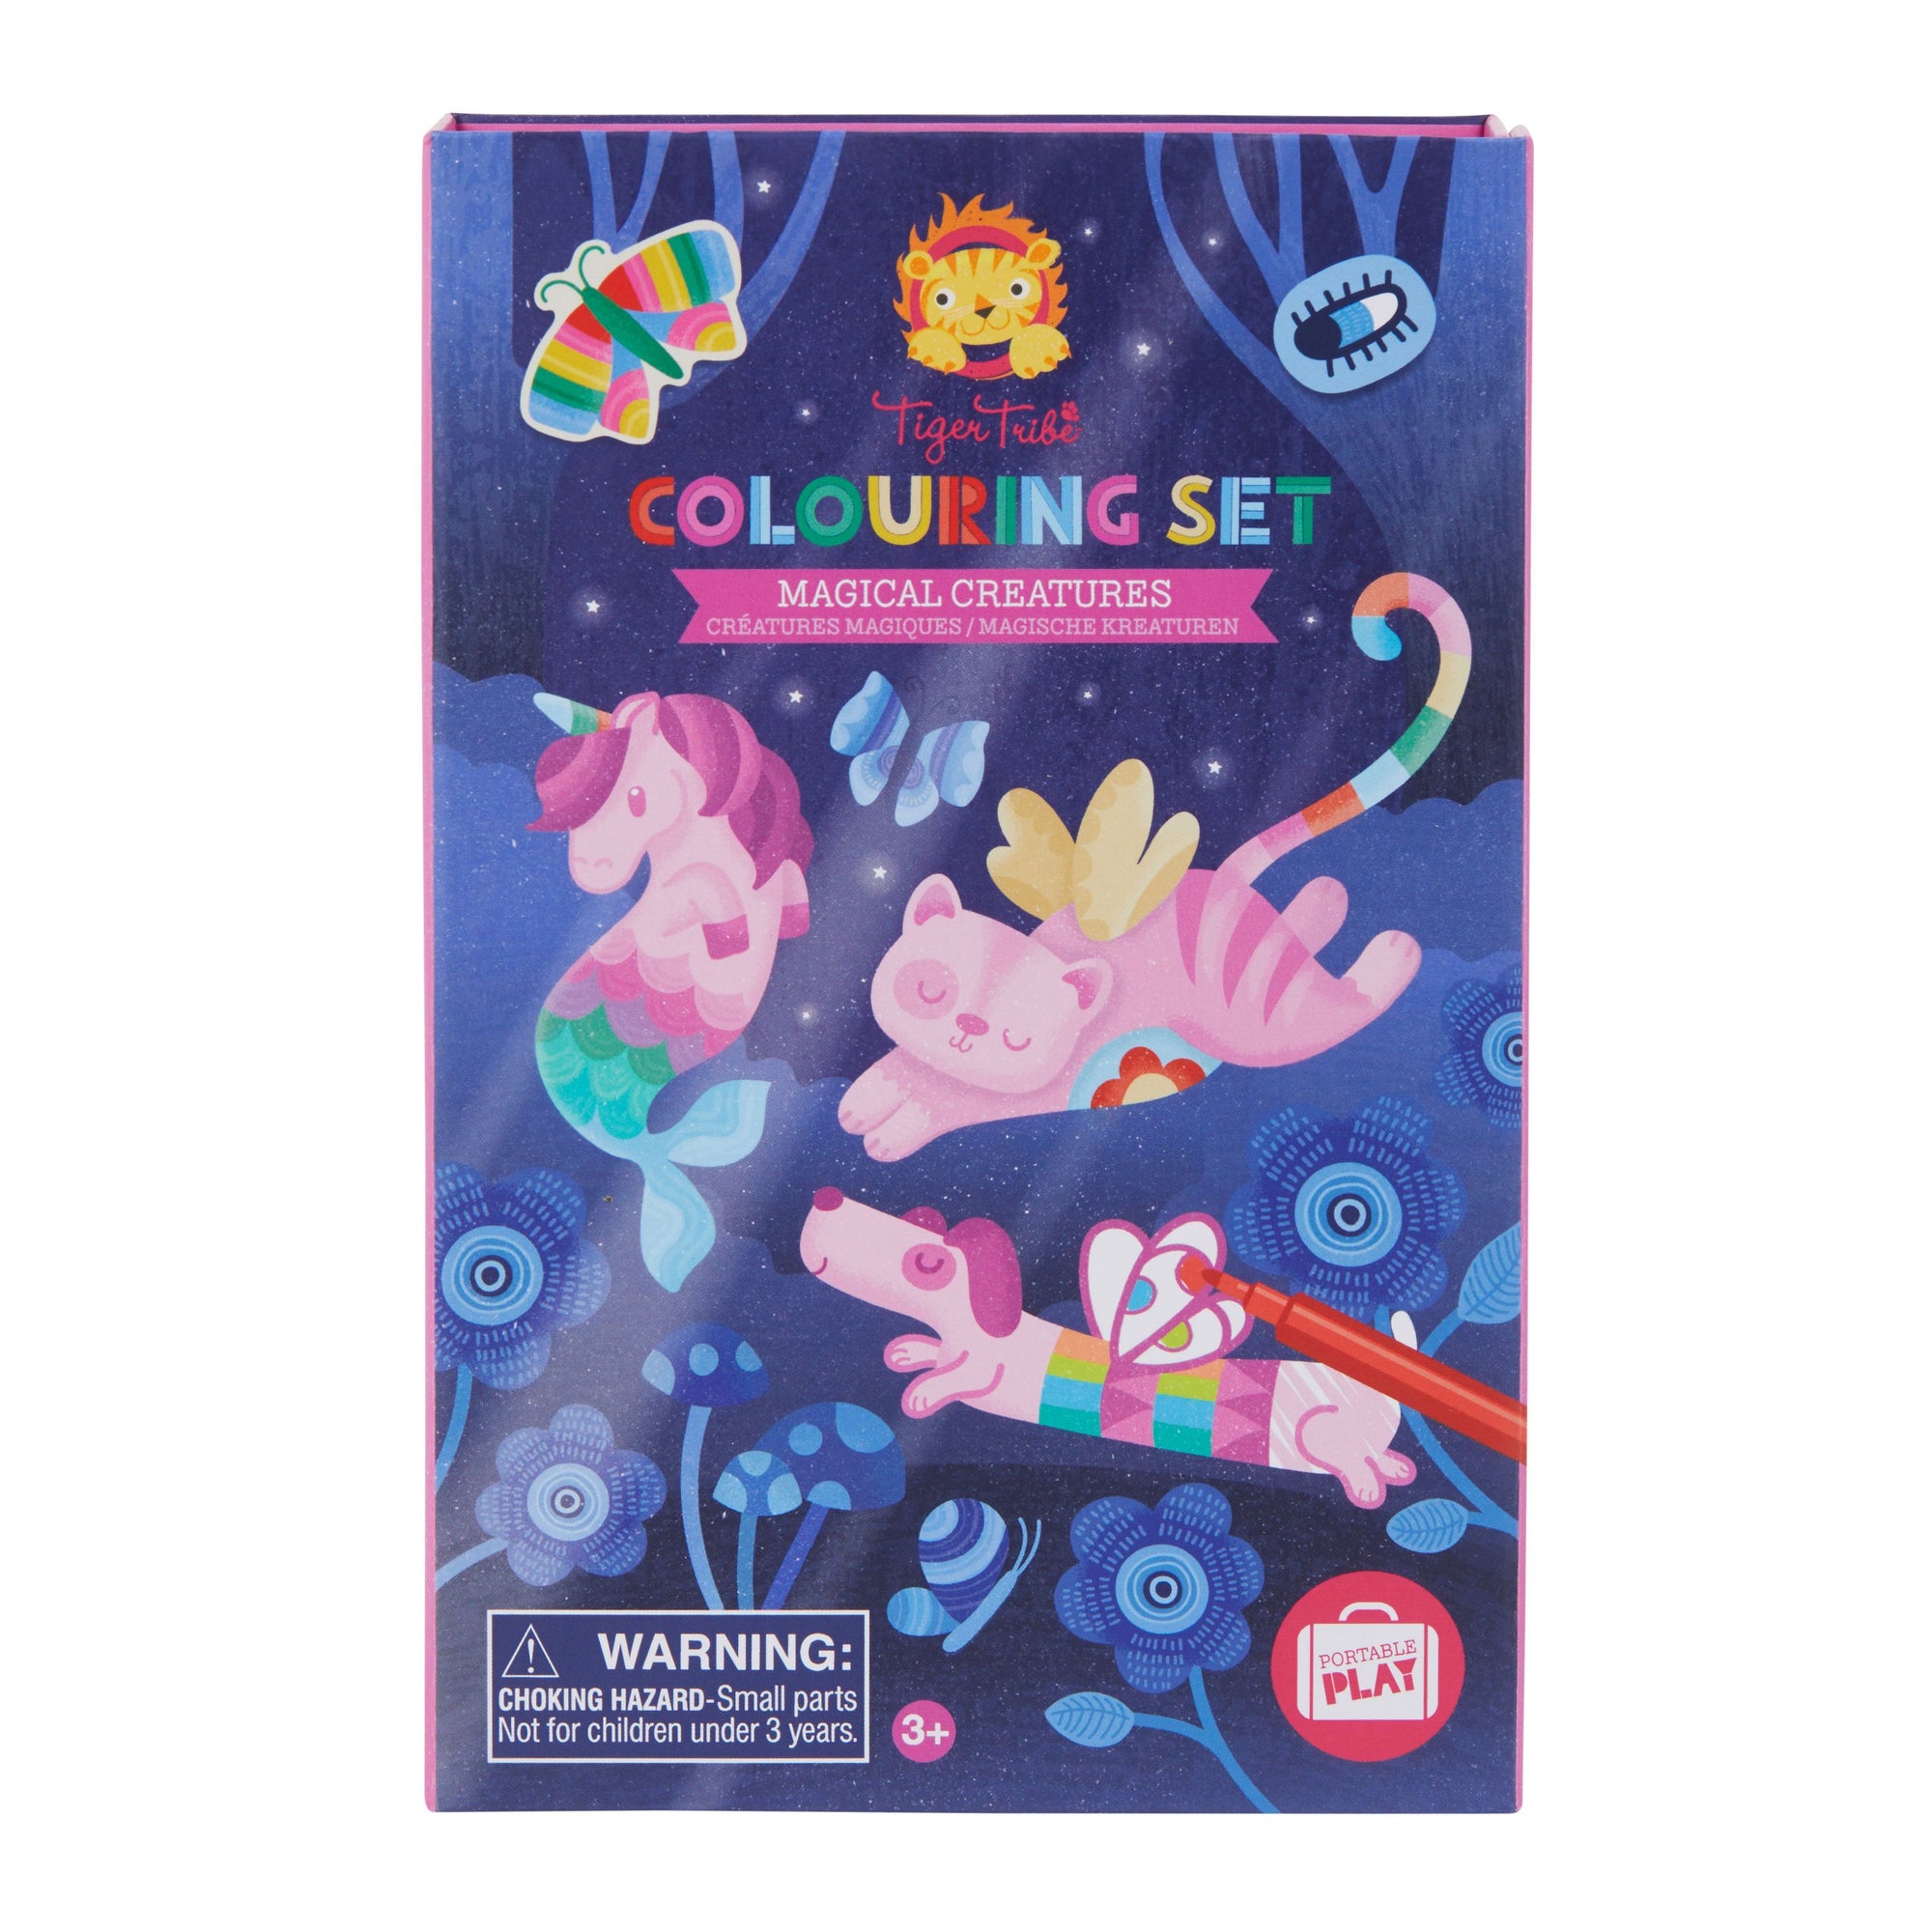 Colouring Set (Magical Creatures)